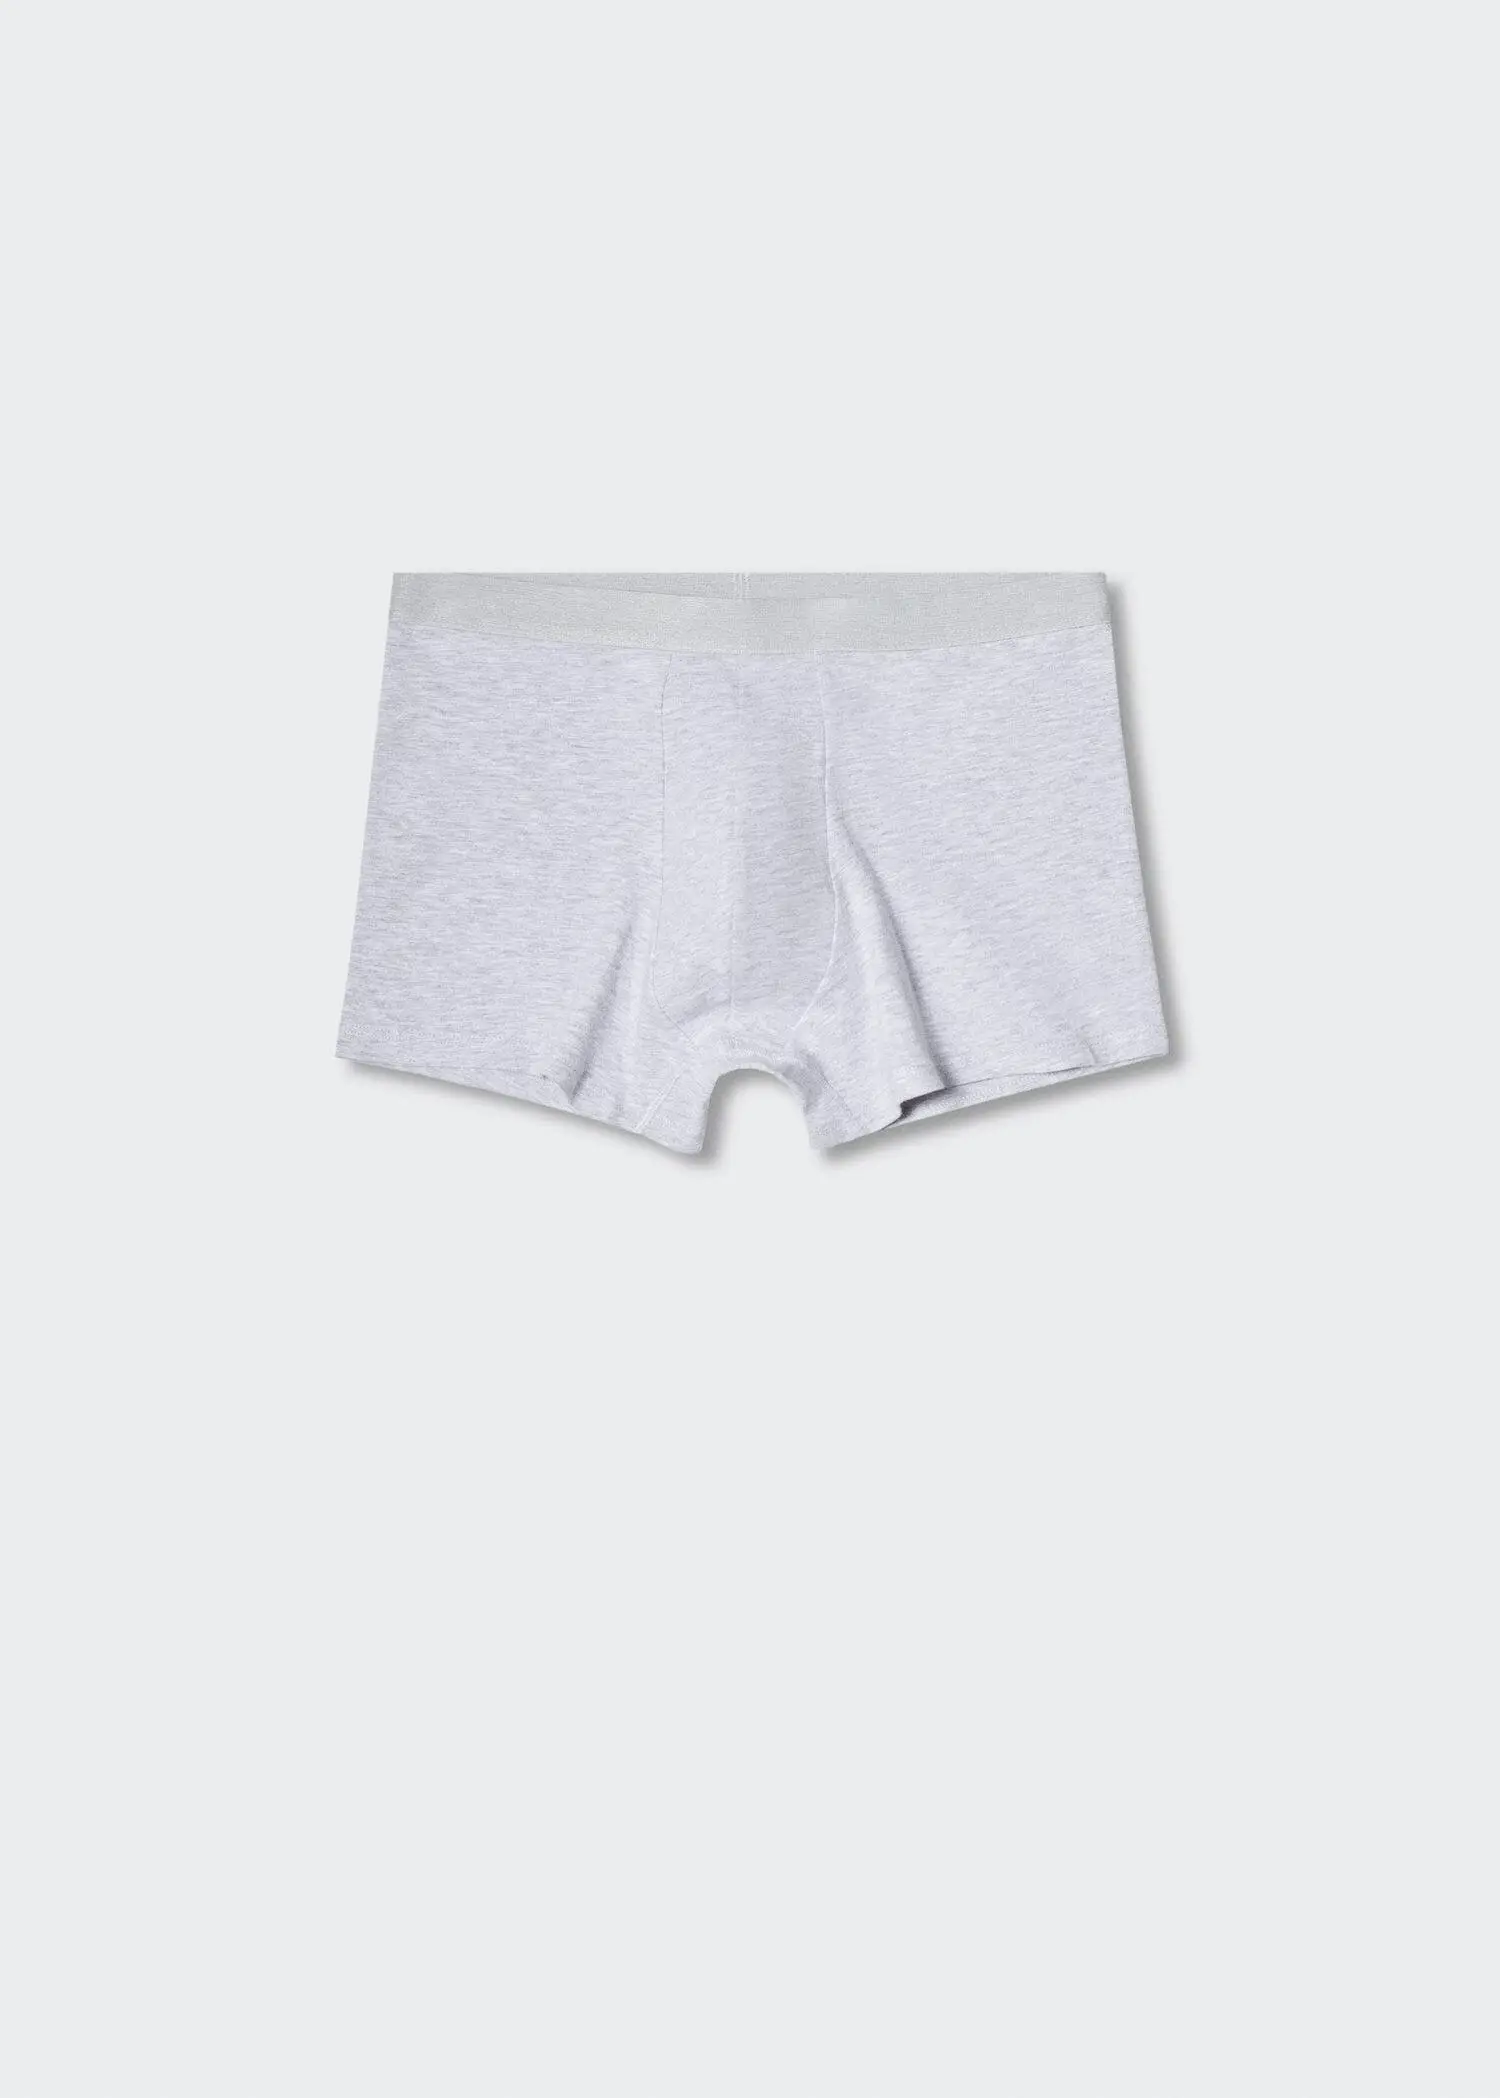 Mango 3-pack cotton boxers. a pair of white boxers shorts on a white background. 